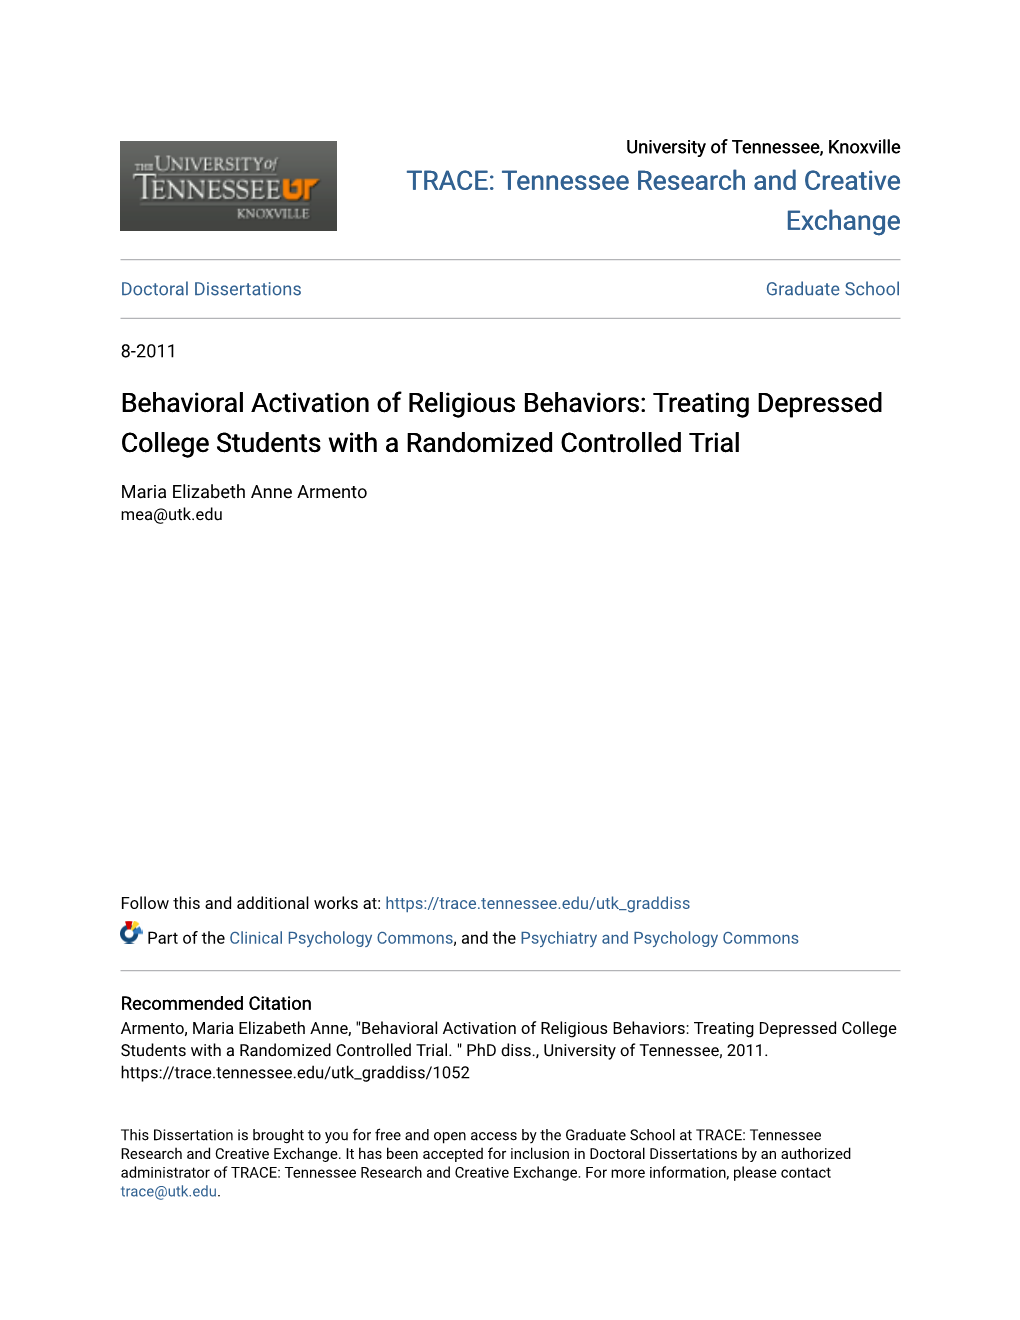 Behavioral Activation of Religious Behaviors: Treating Depressed College Students with a Randomized Controlled Trial